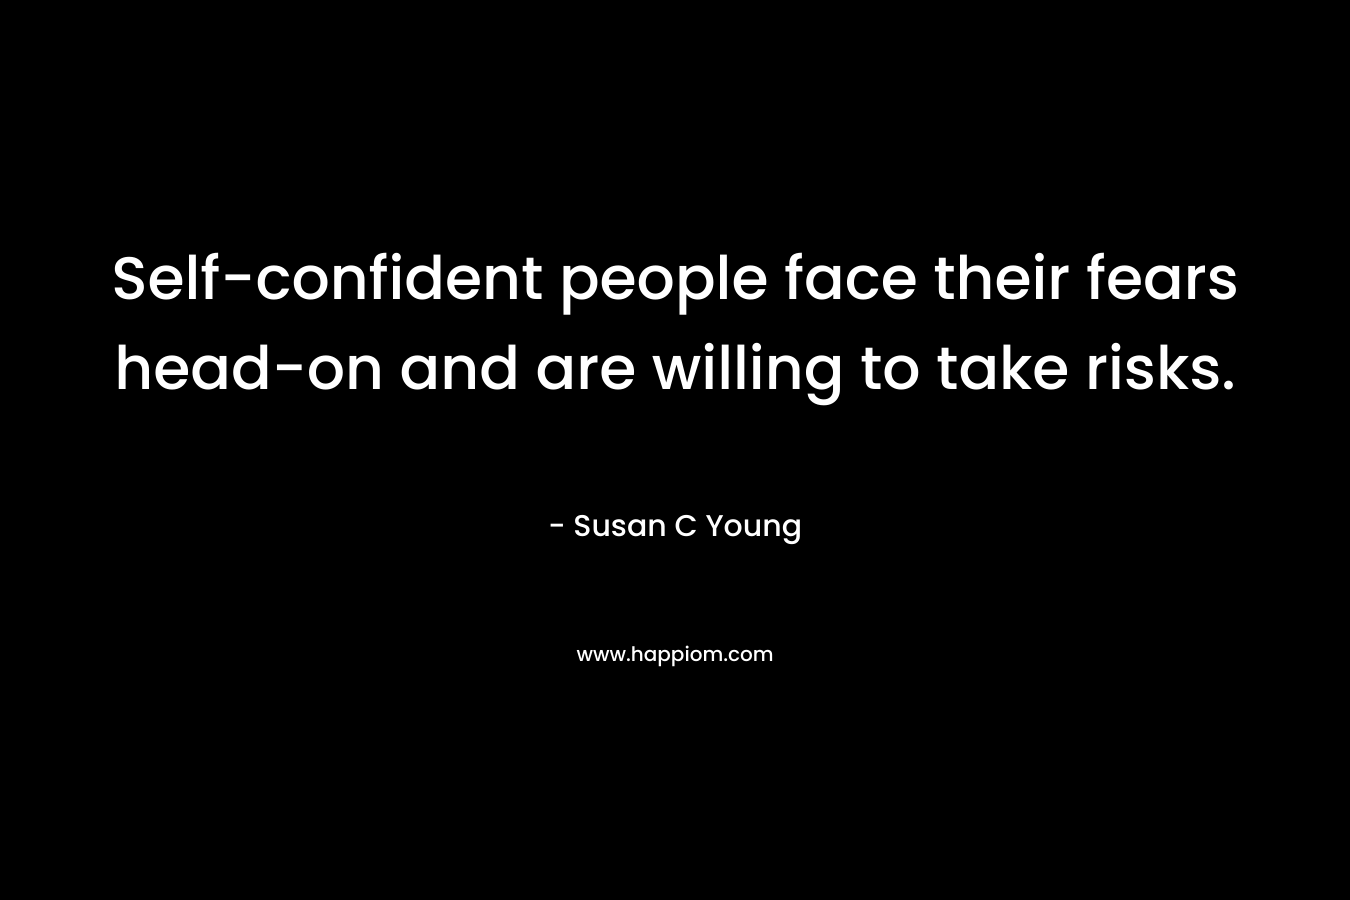 Self-confident people face their fears head-on and are willing to take risks. – Susan C Young